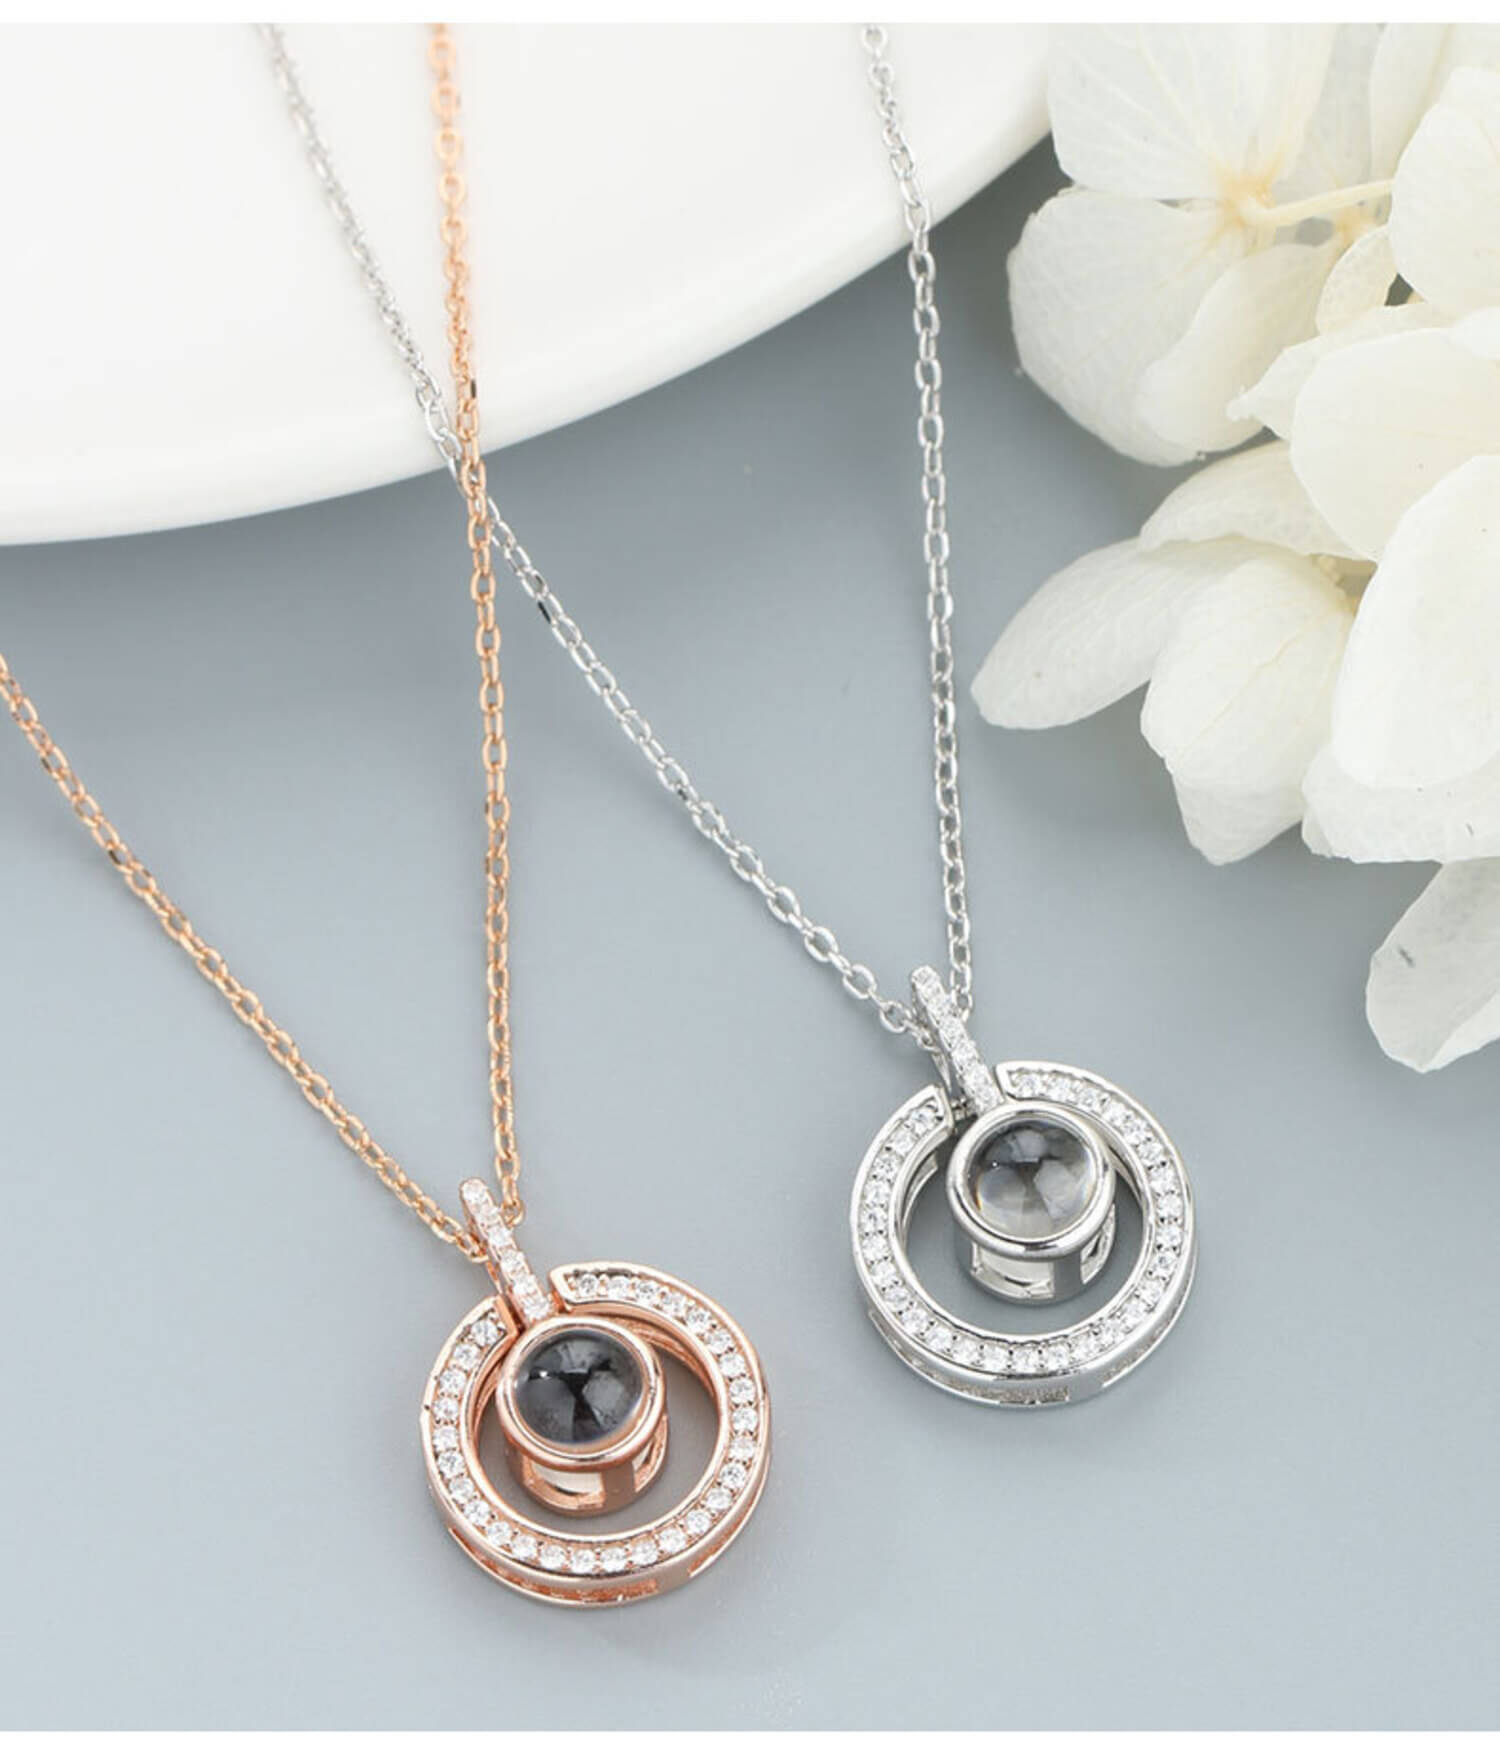 photo projection necklace uk fast delivery